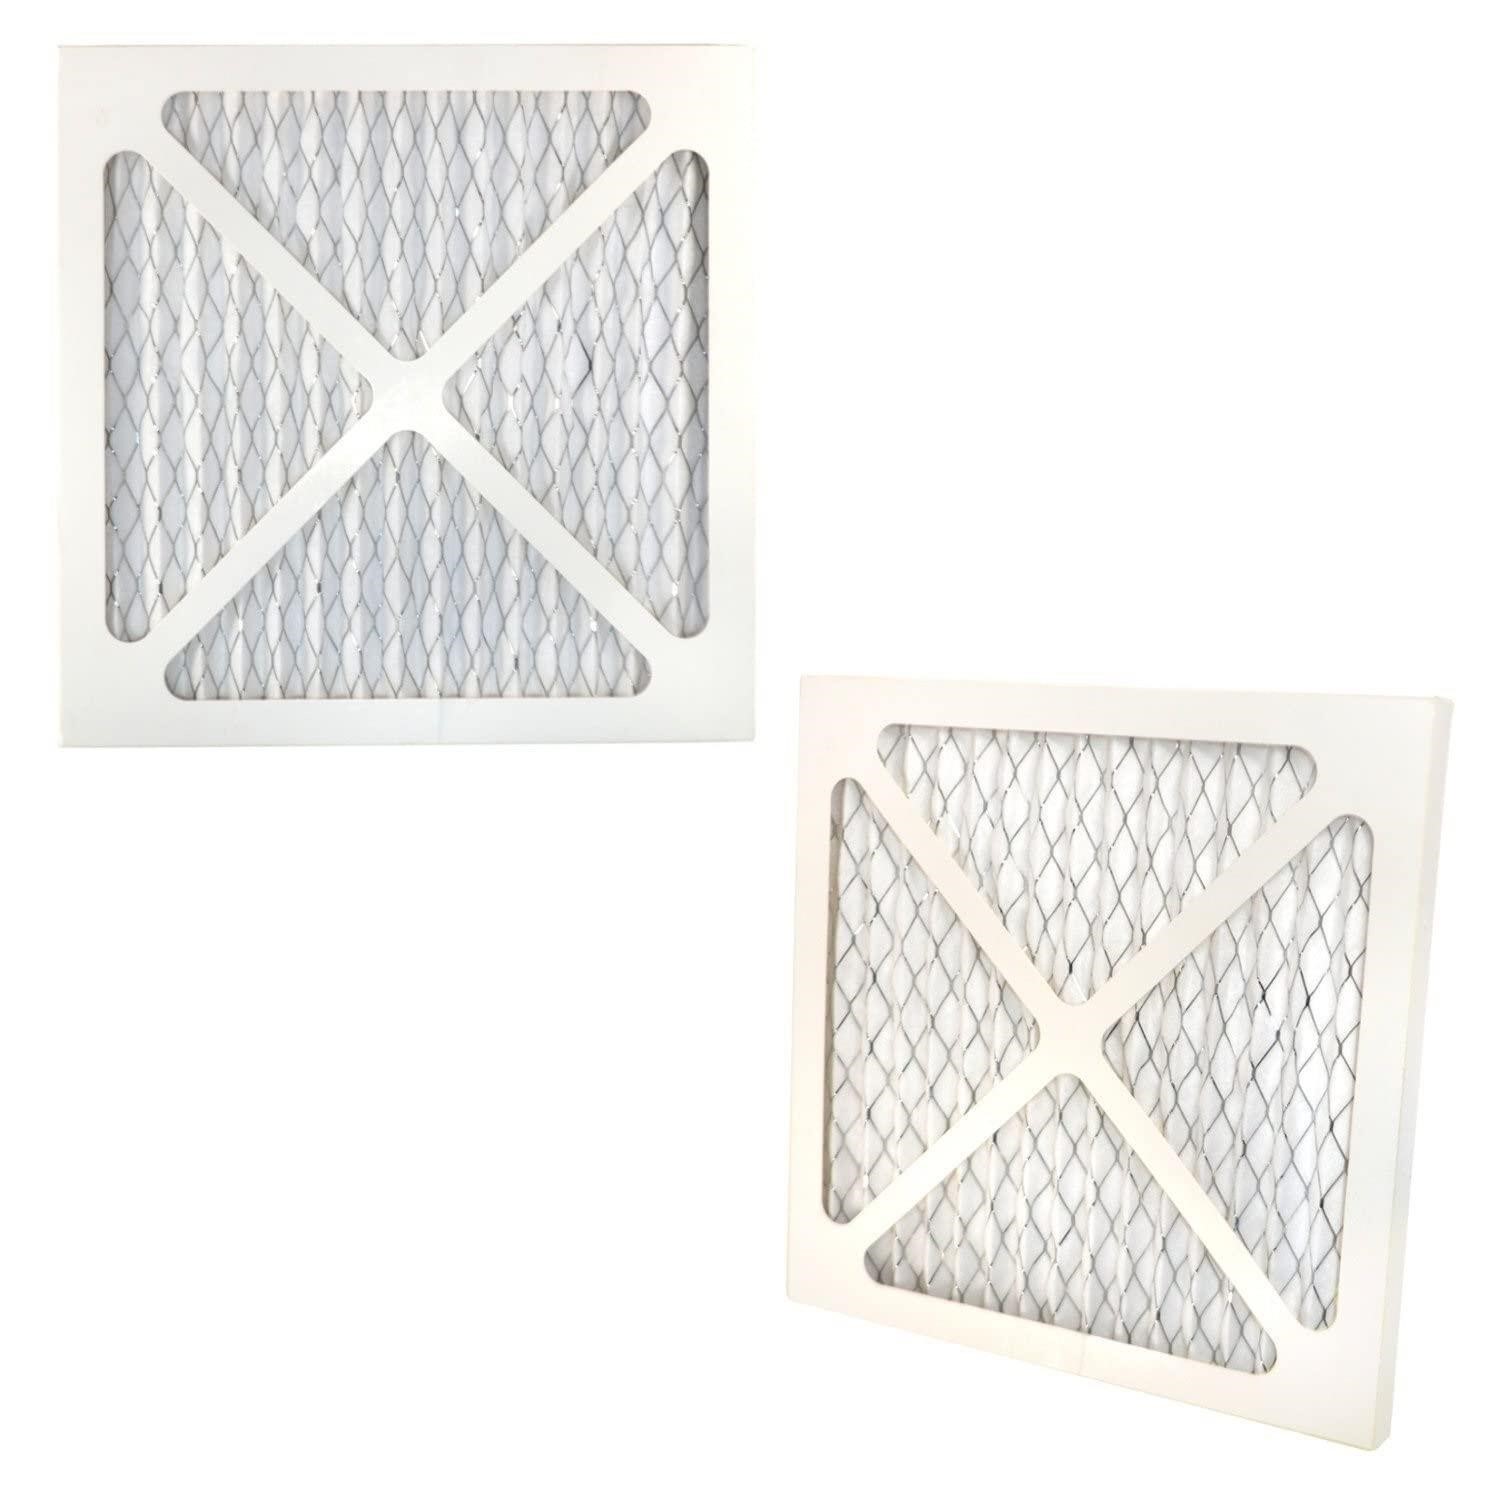 HQRP 2-pack Pleated AC Furnace Air Filters, 12x12x